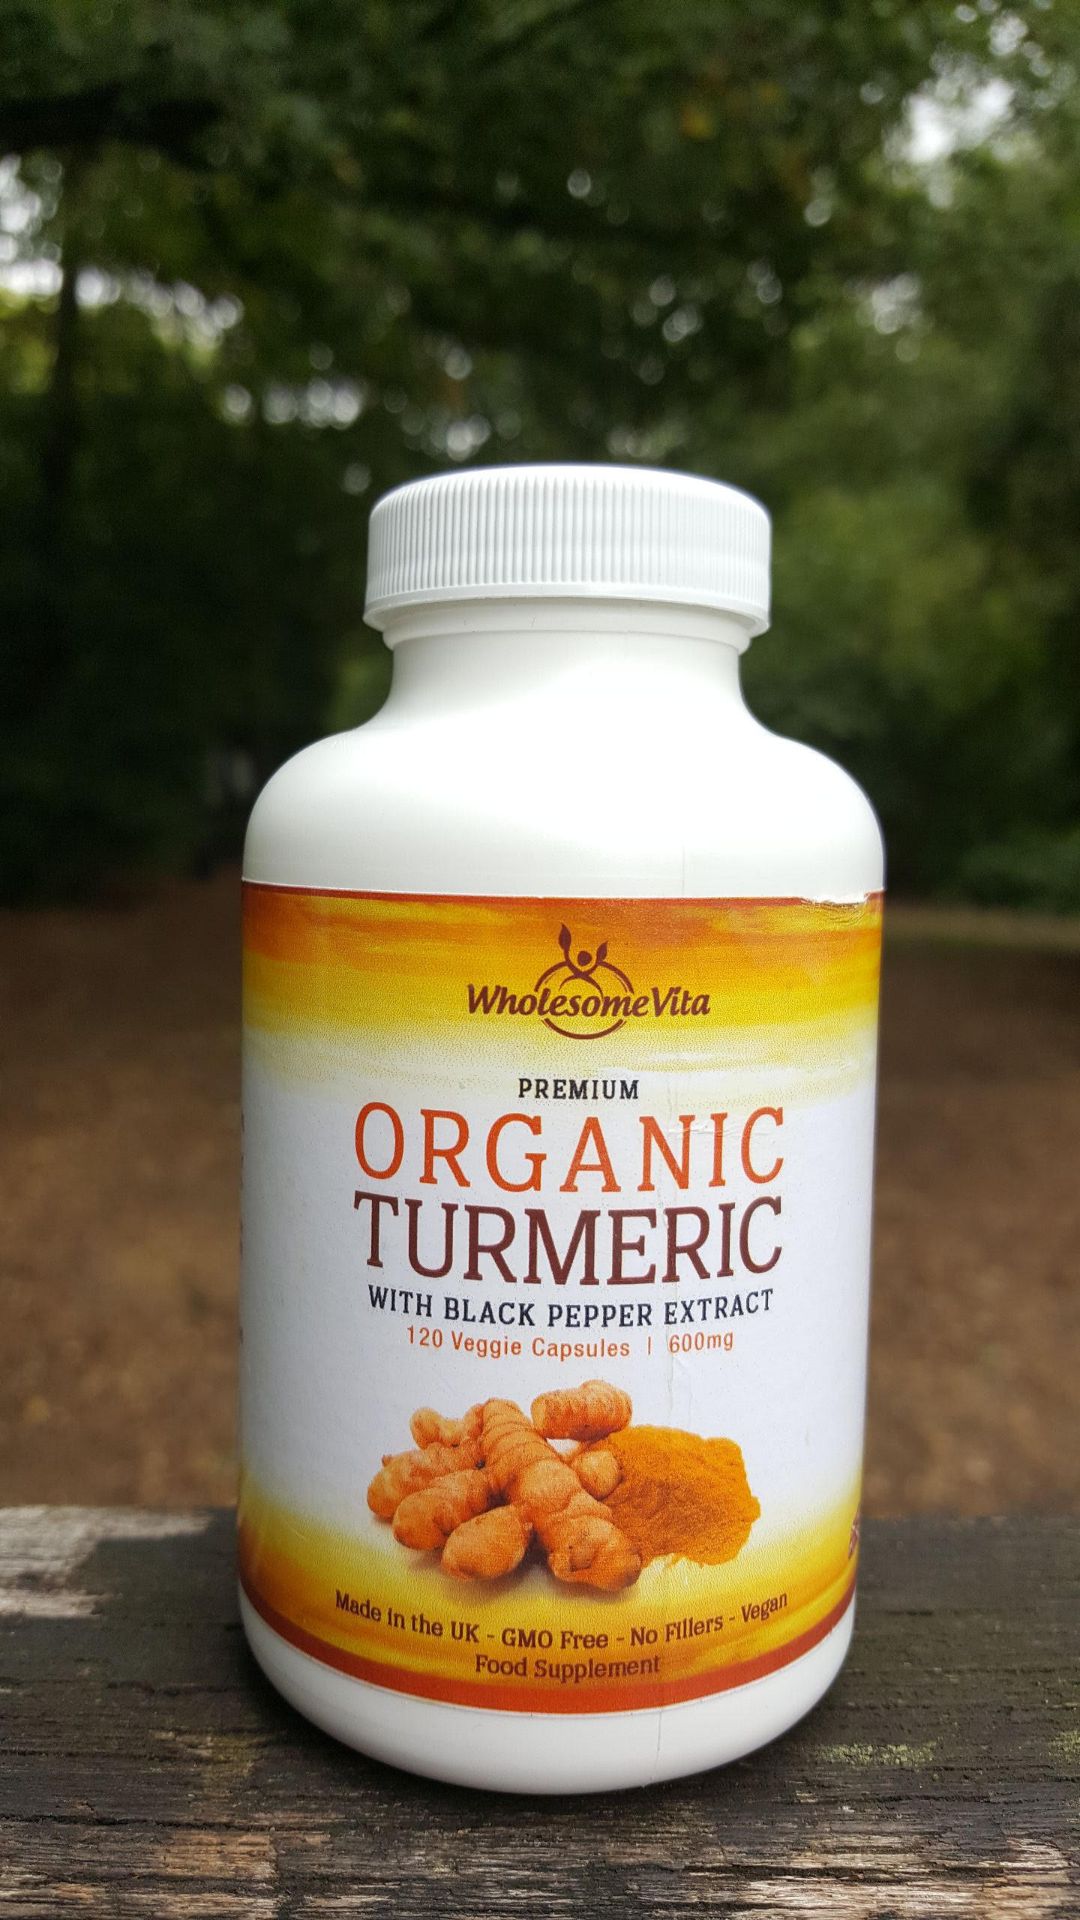 210 Bottles Free Deliver Organic Turmeric and Piperine Capsules. Each bottle contain 120 capsules.